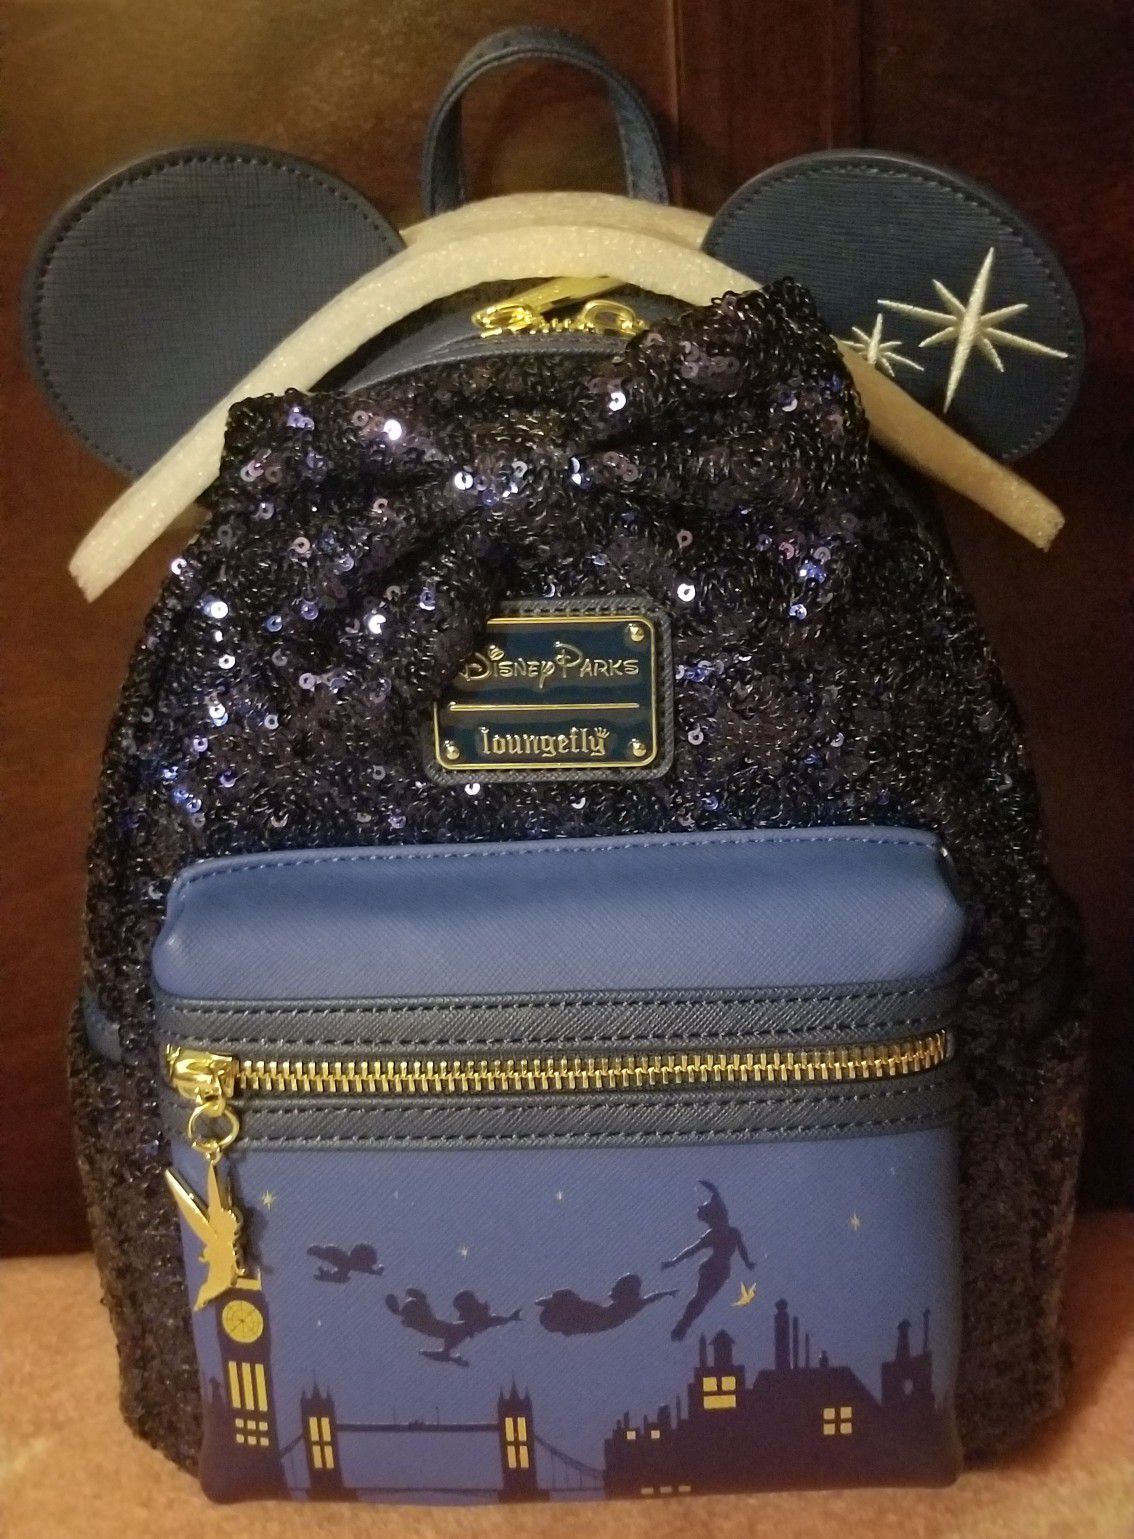 Loungefly peterpan backpack new with tags